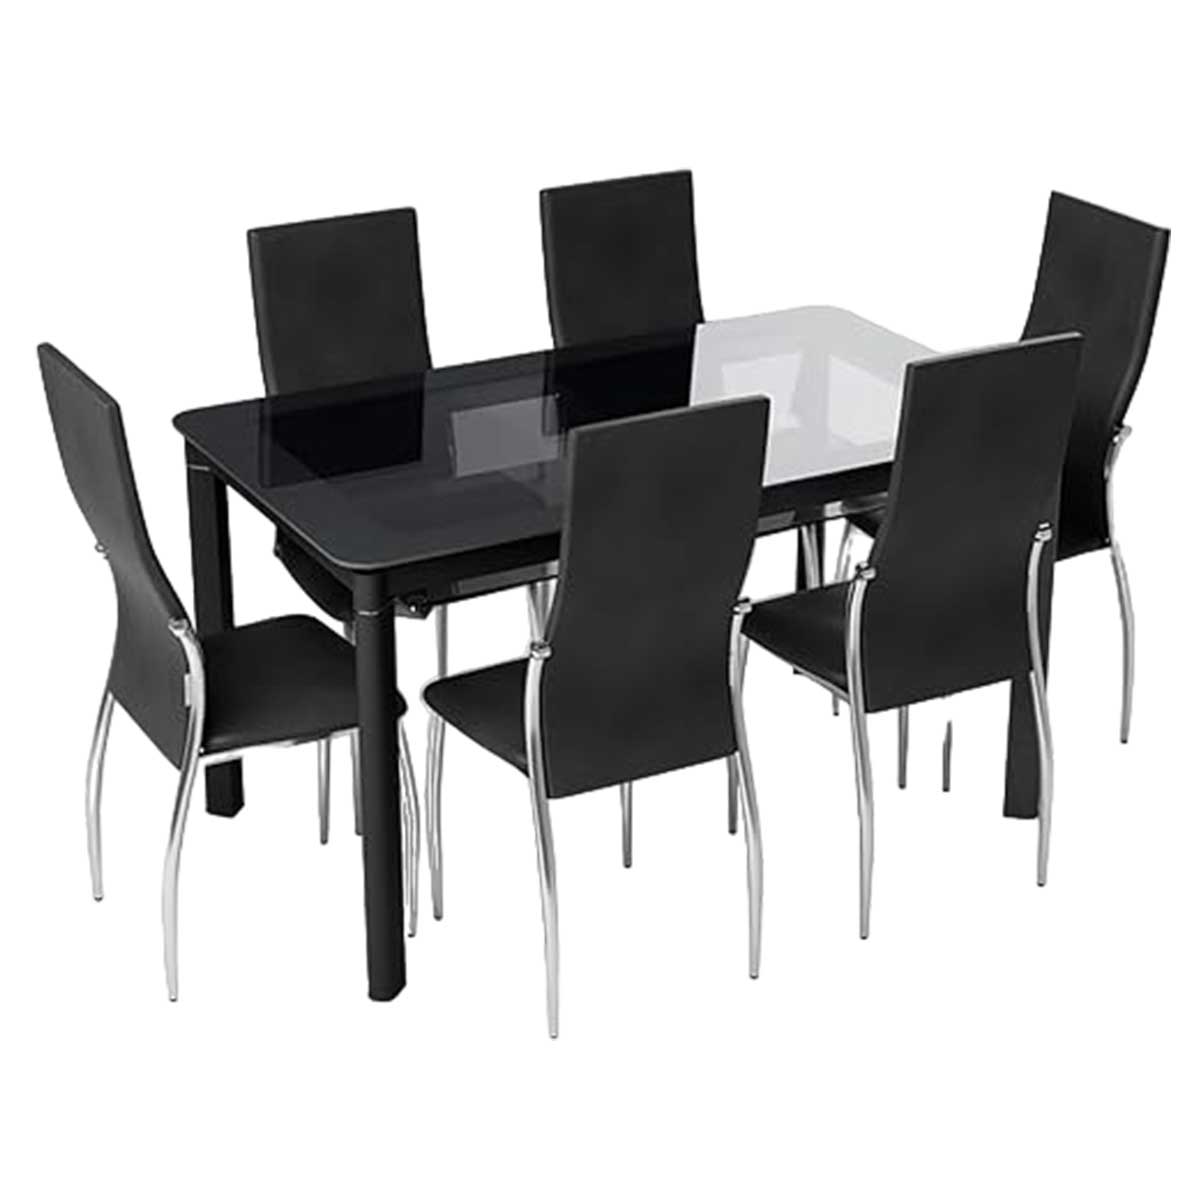 Cafeteria Furniture Set Manufacturers, Suppliers in Shalimar Bagh